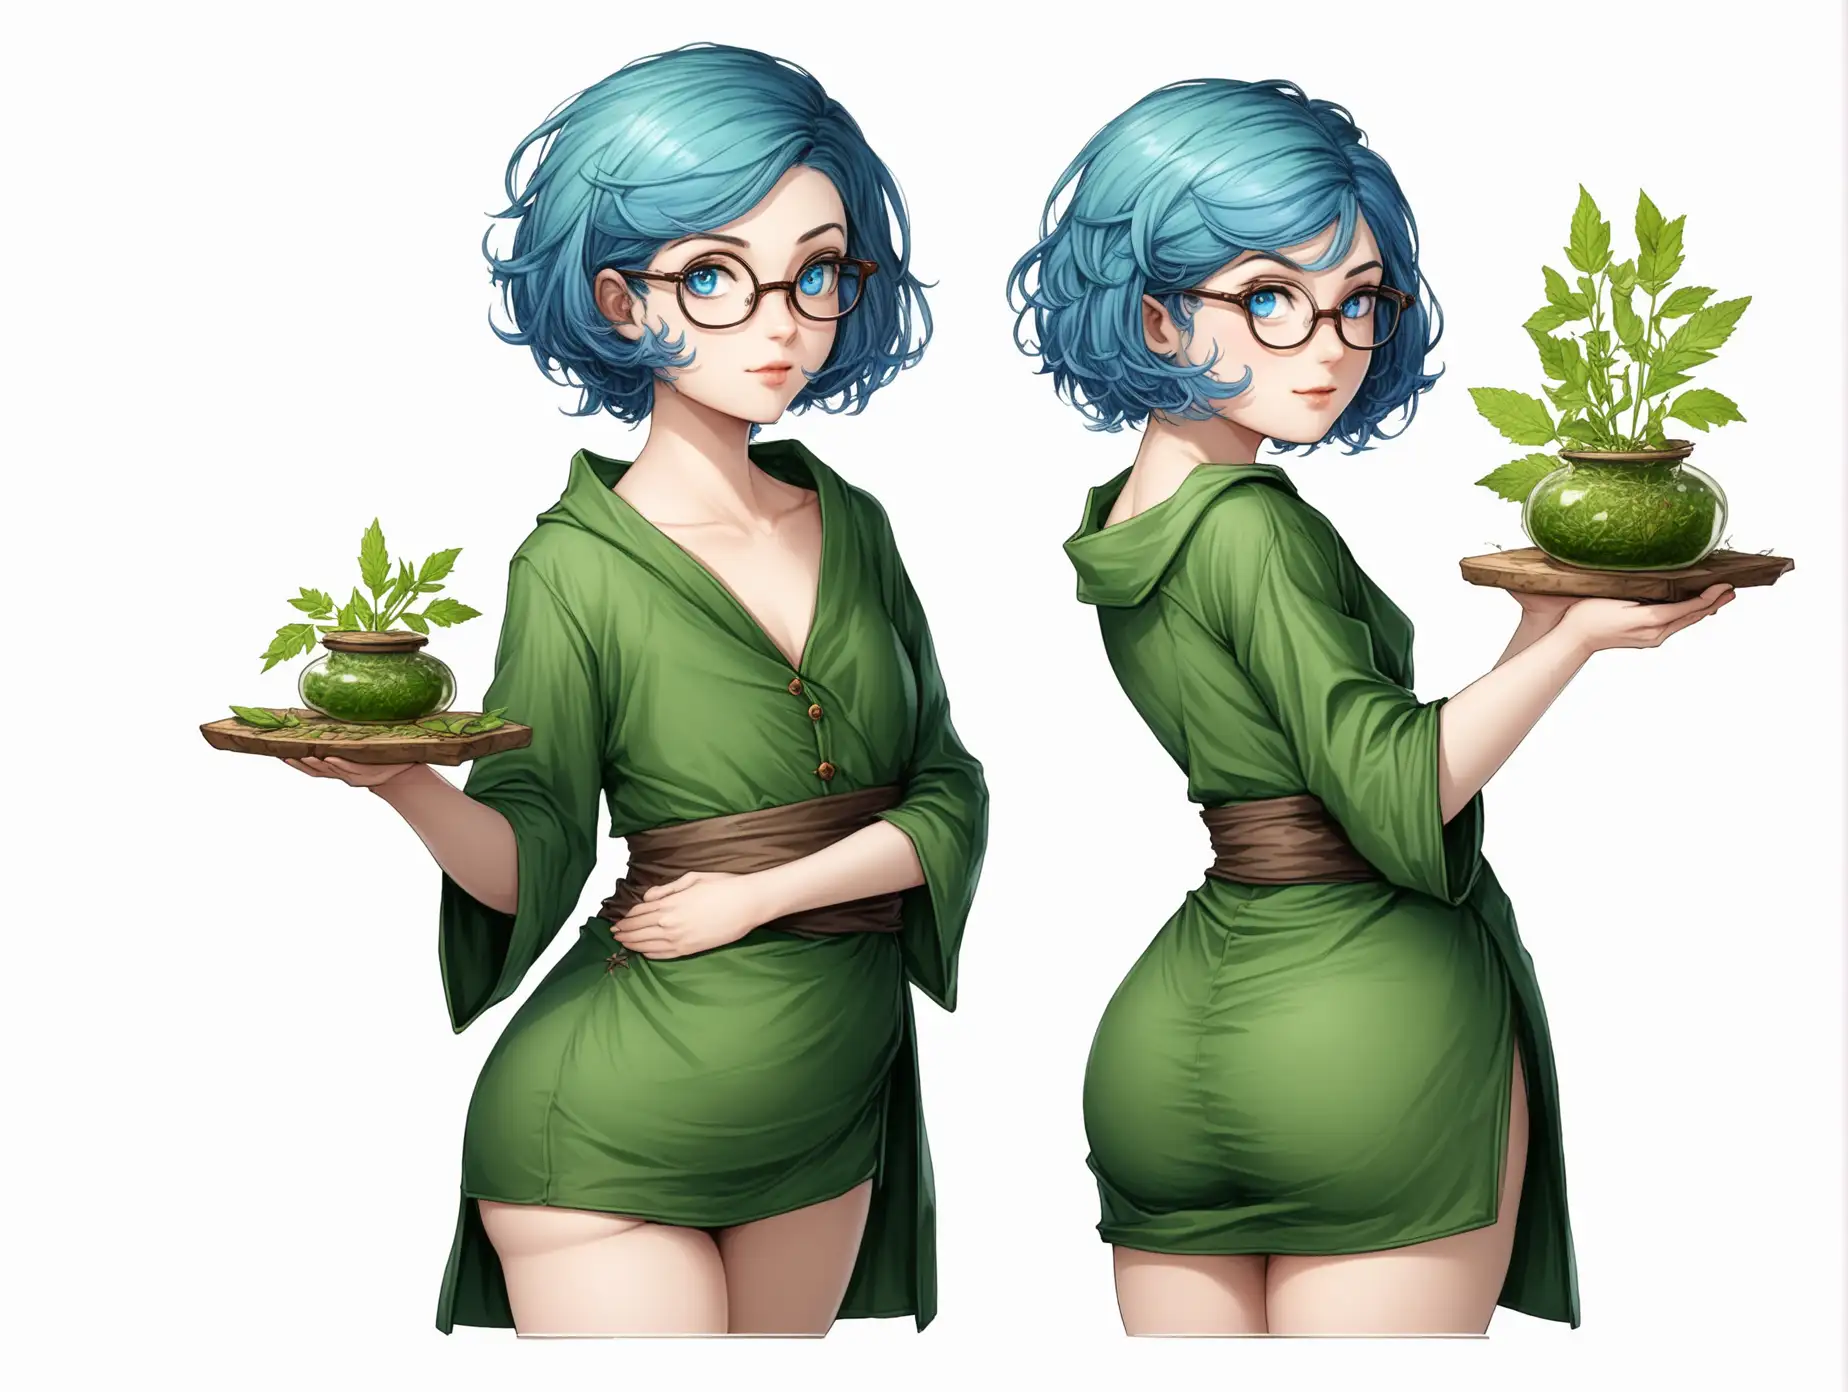 BlueHaired-Herbalist-Witch-in-Green-Garb-on-White-Background